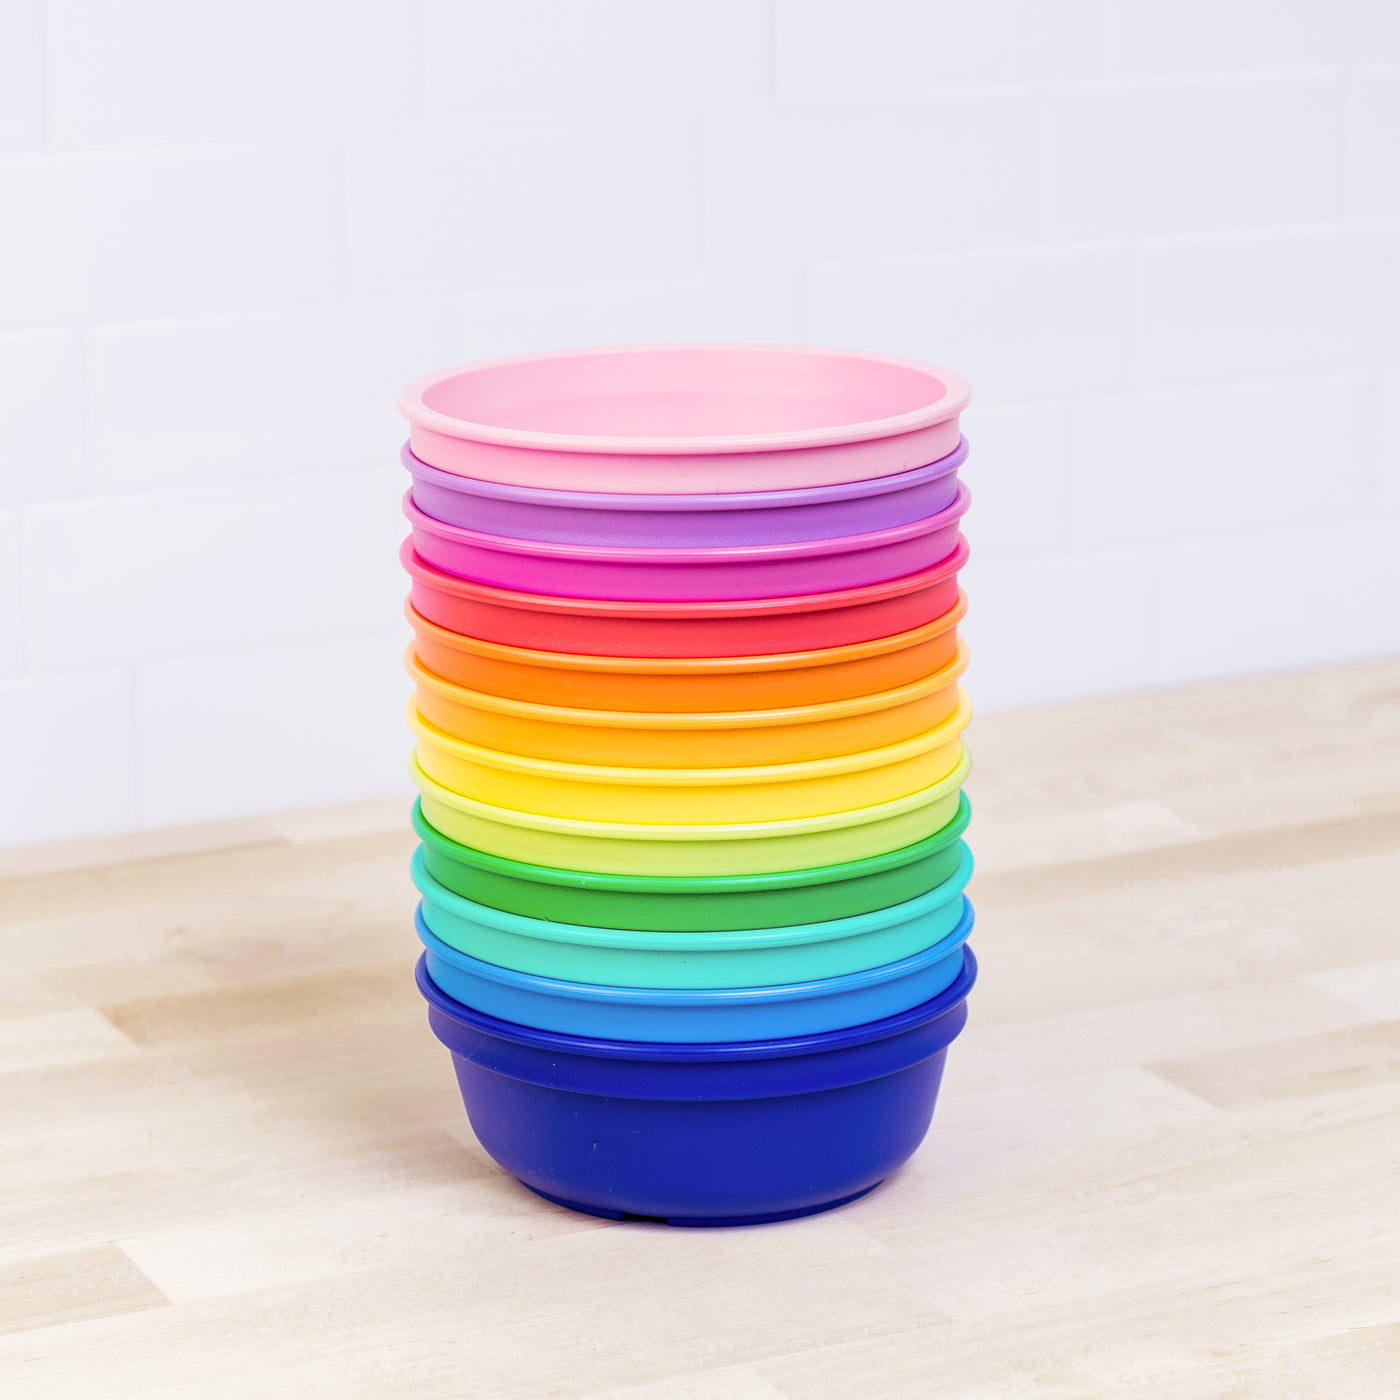 Re-Play Bowl (assorted colours)